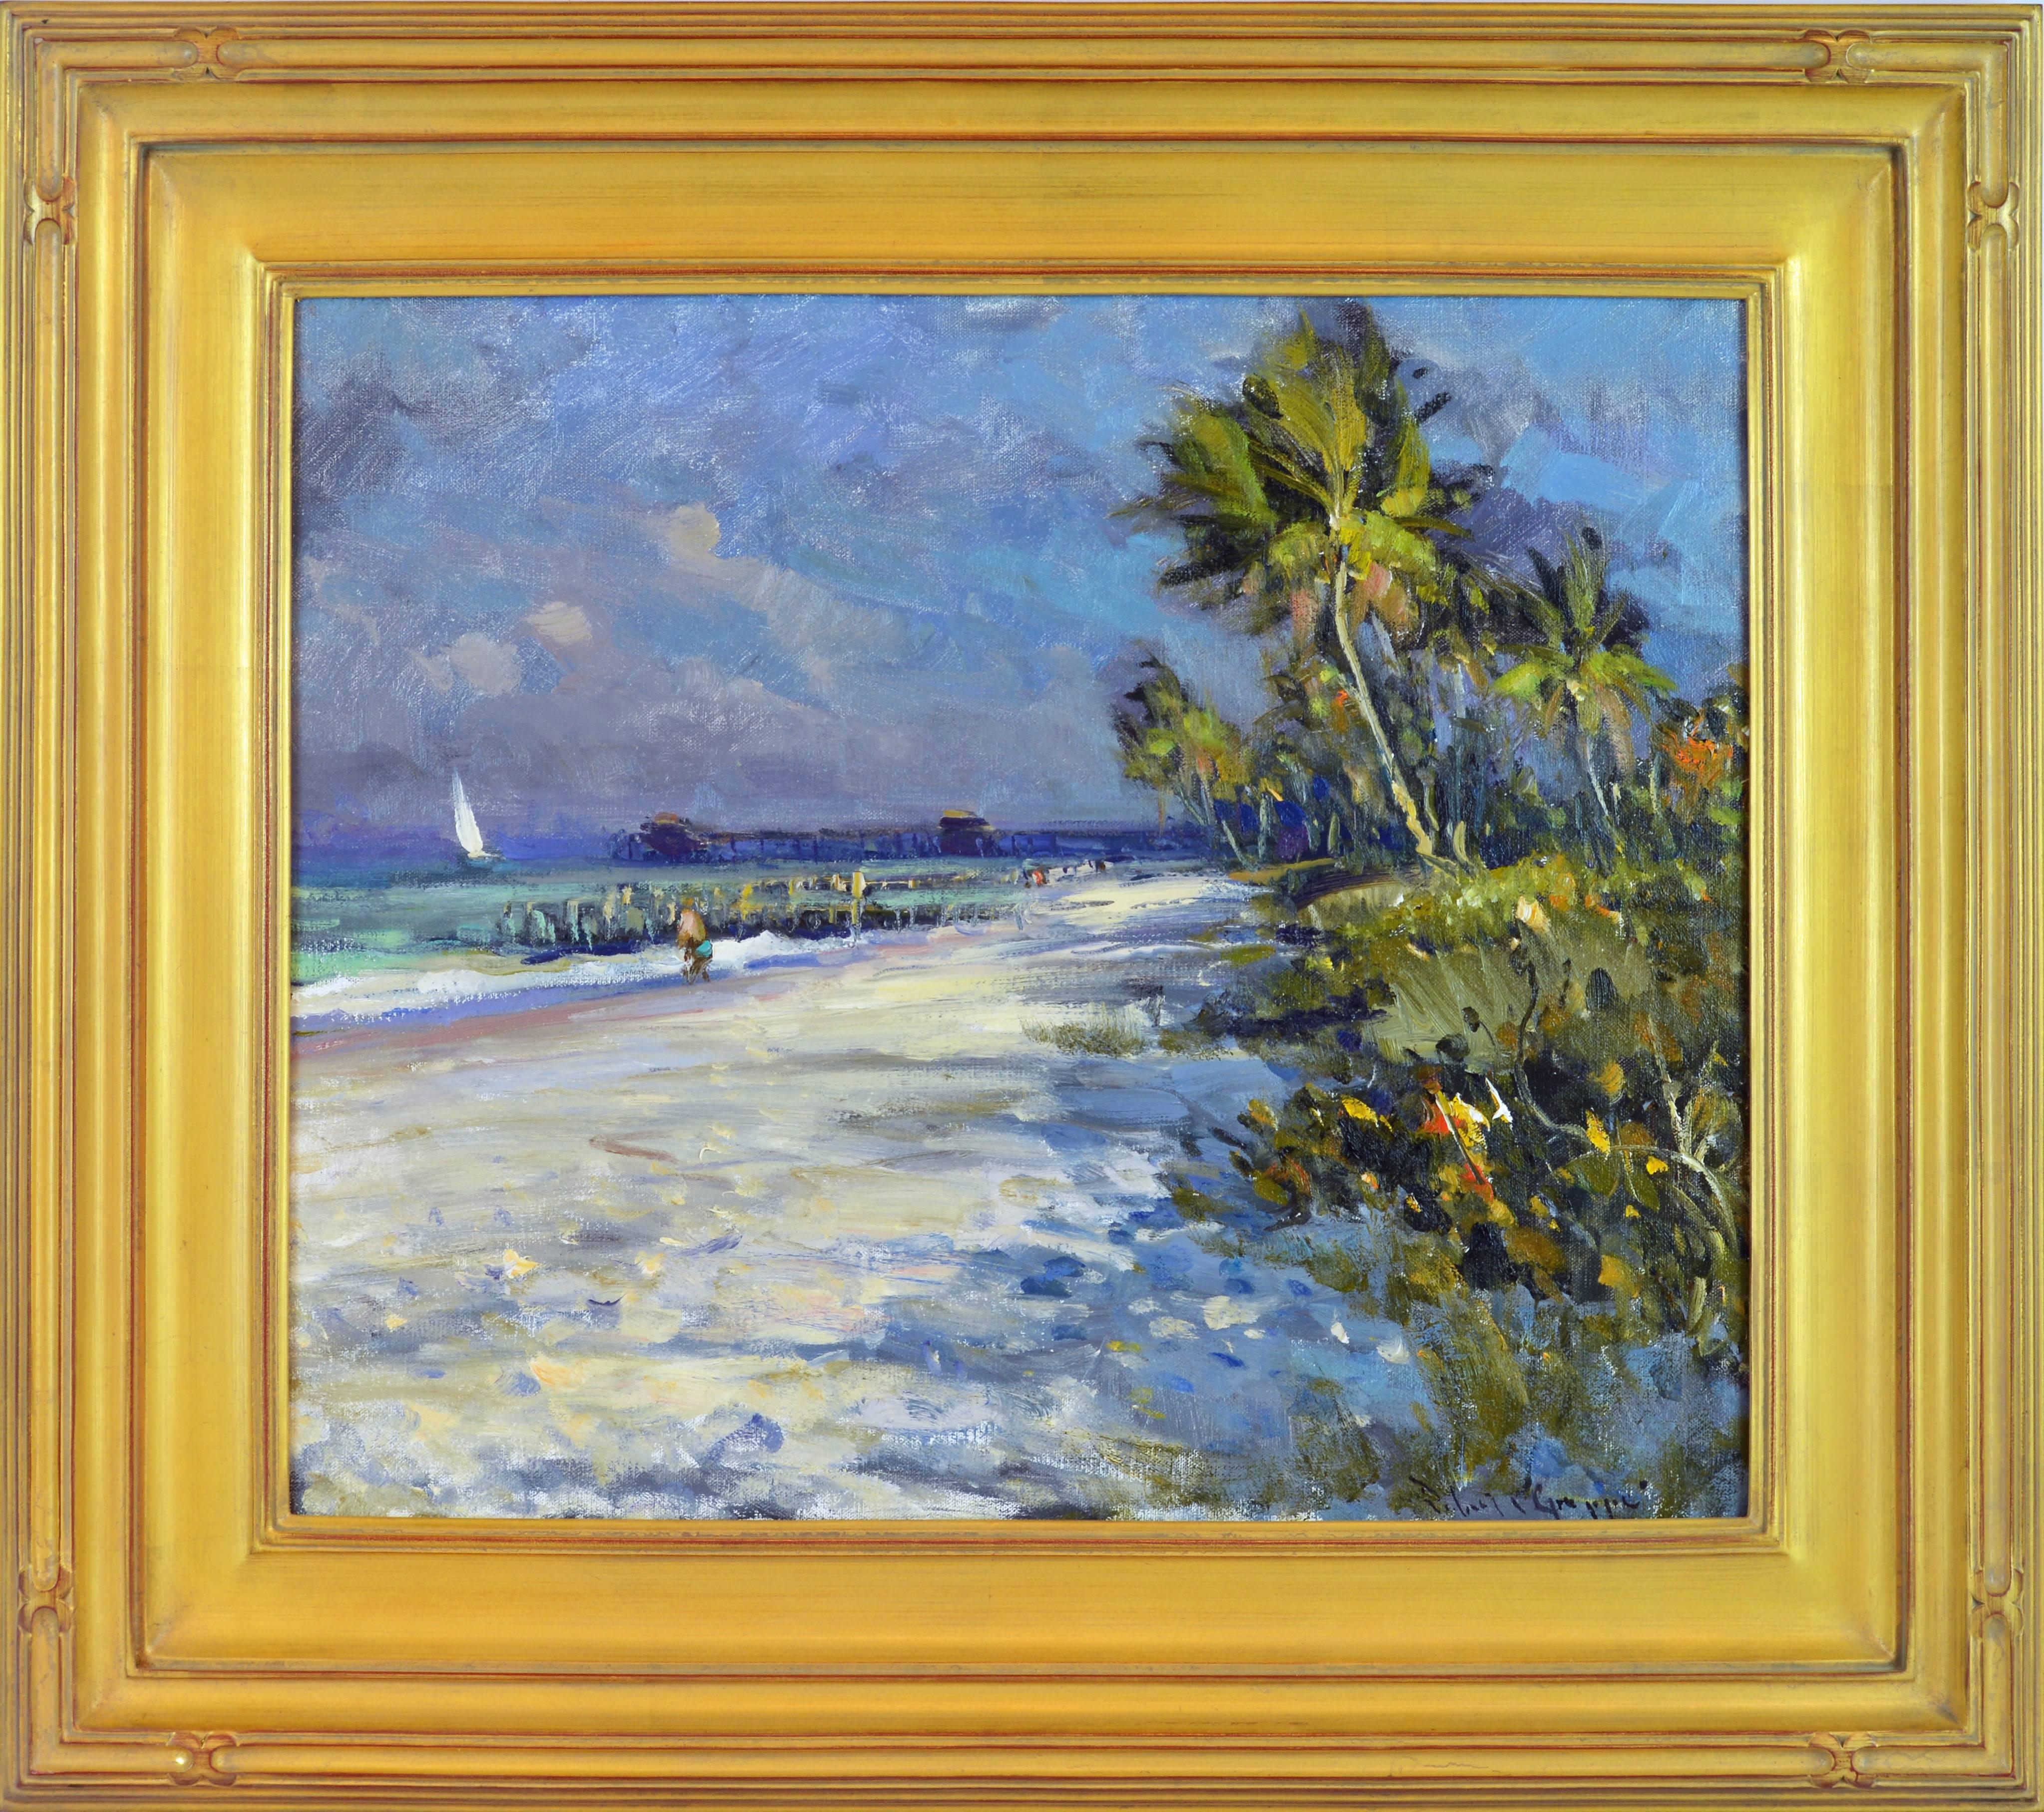 In this vibrant 20 x 24 in. oil on canvas by legendary Robert C, Gruppe, American b. 1944, again discovers the beauty of views mostly hidden for others capturing with light and color a Florida that may soon be history. This work depicts the coast of